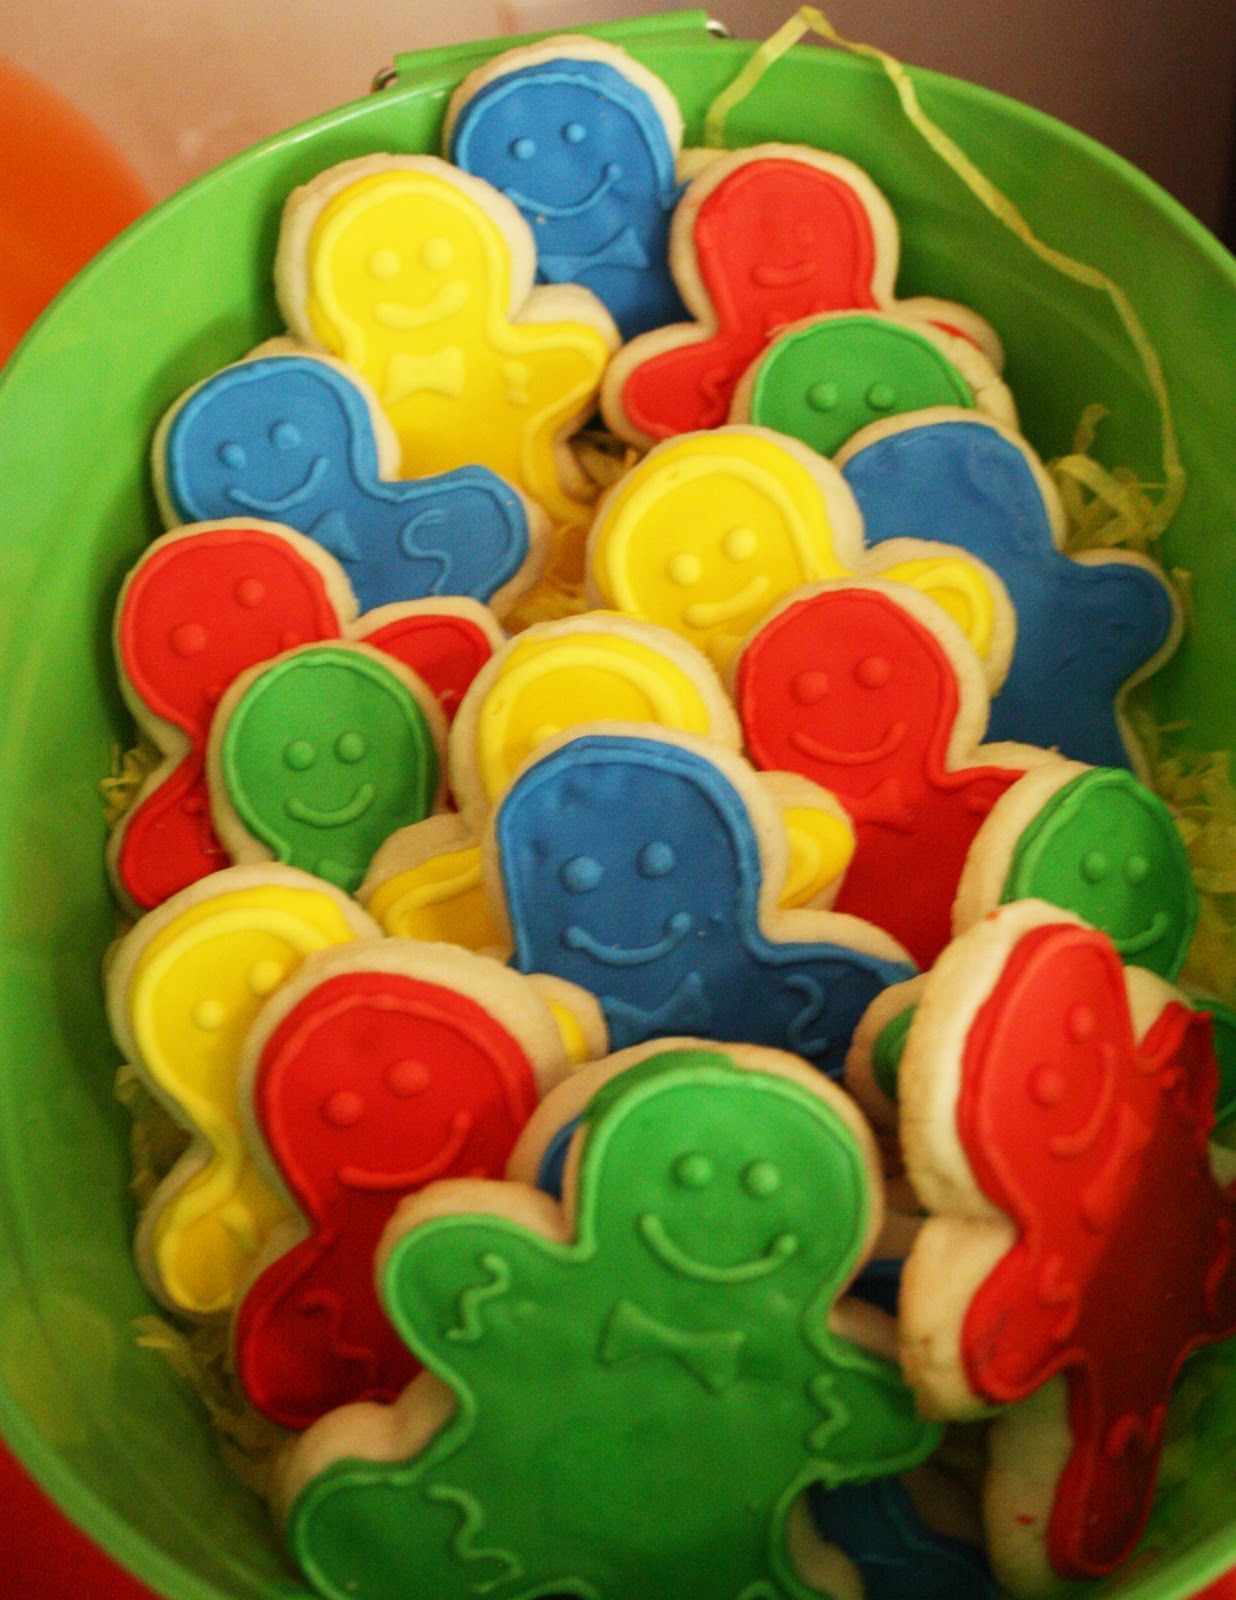 Cookies Candyland Party! They look just like the candyland pawns! too